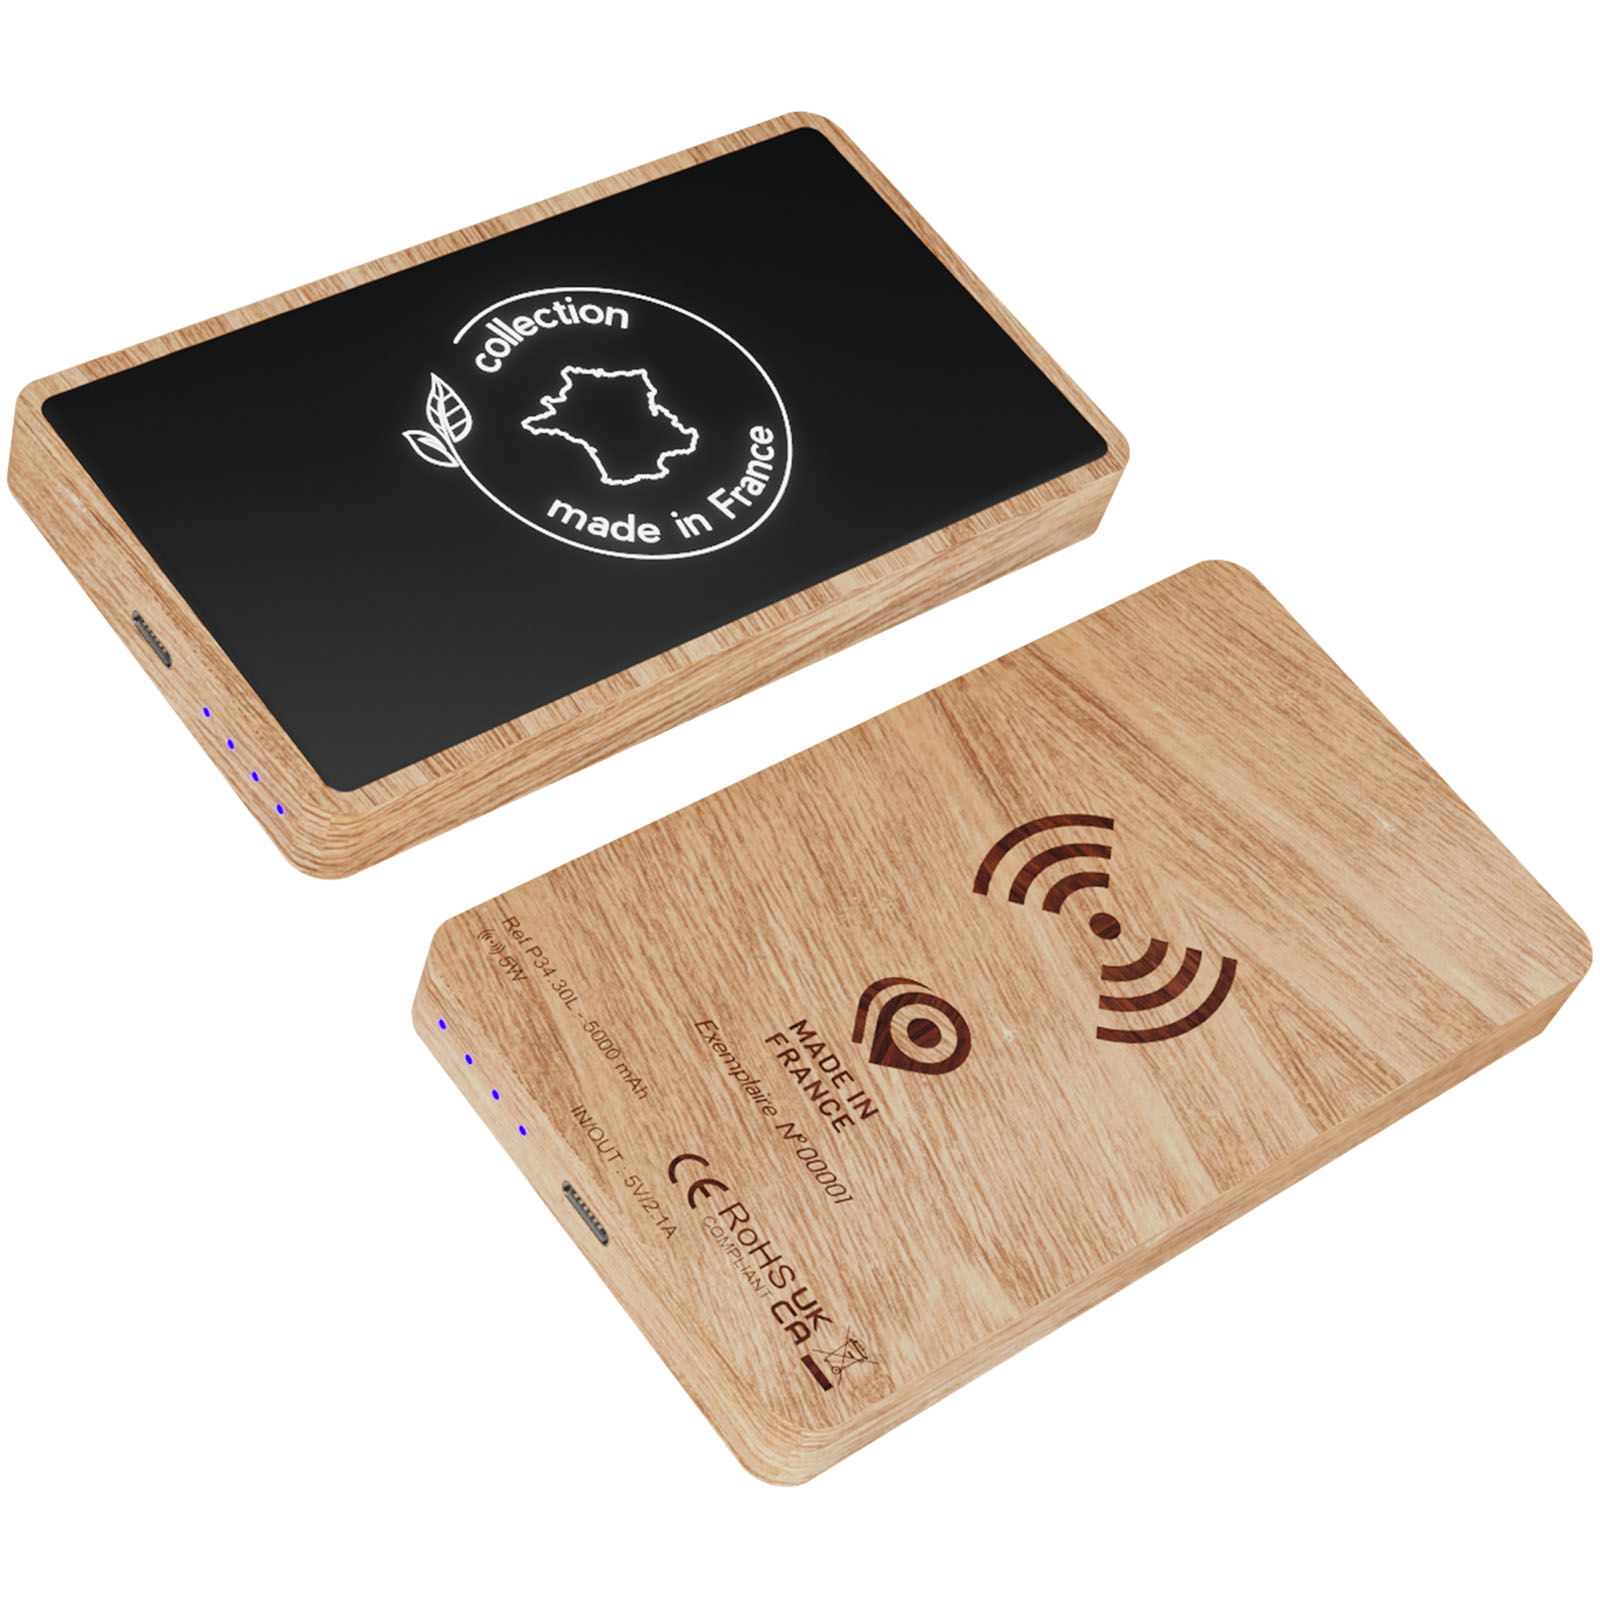 5000 mAh Wooden Power Bank with Wireless Charging and Light-Up Logo - Upham